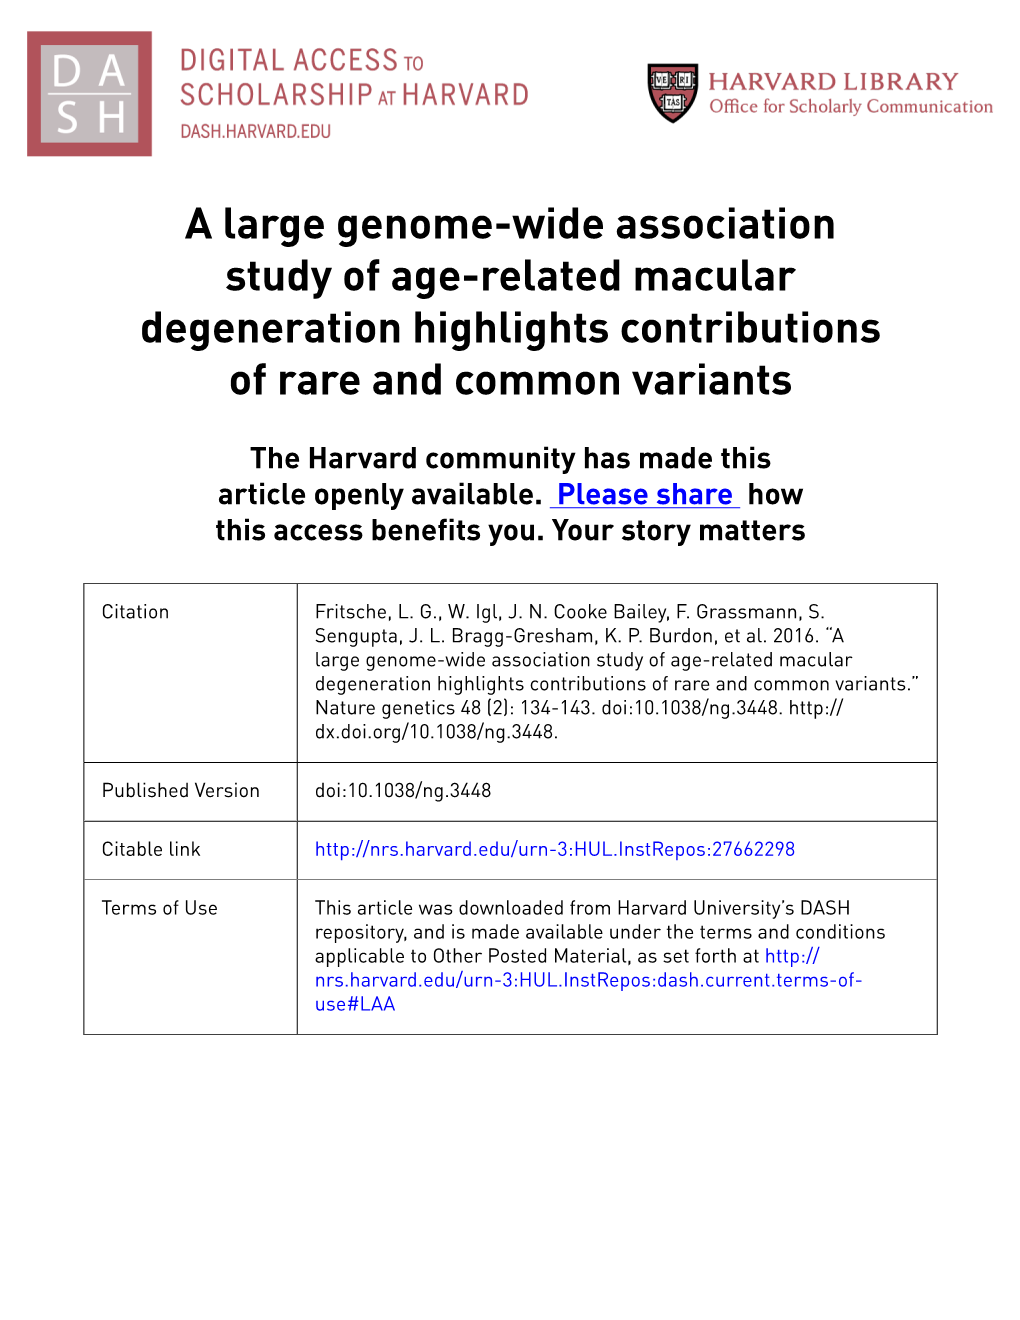 A Large Genome-Wide Association Study of Age-Related Macular Degeneration Highlights Contributions of Rare and Common Variants